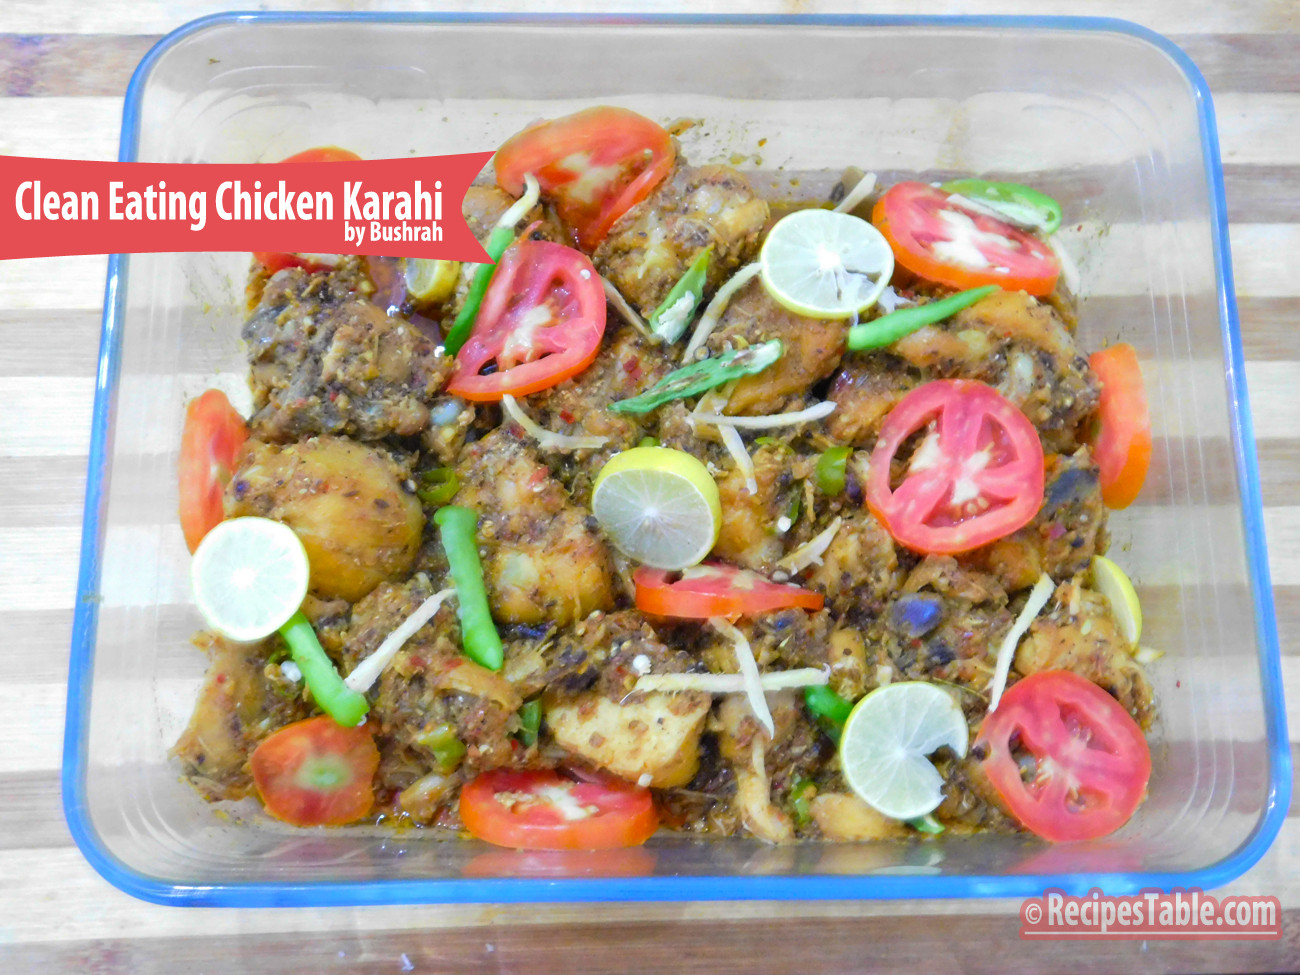 Clean Eating Recipes Chicken
 Recipe Clean Eating Chicken Karahi Recipestable